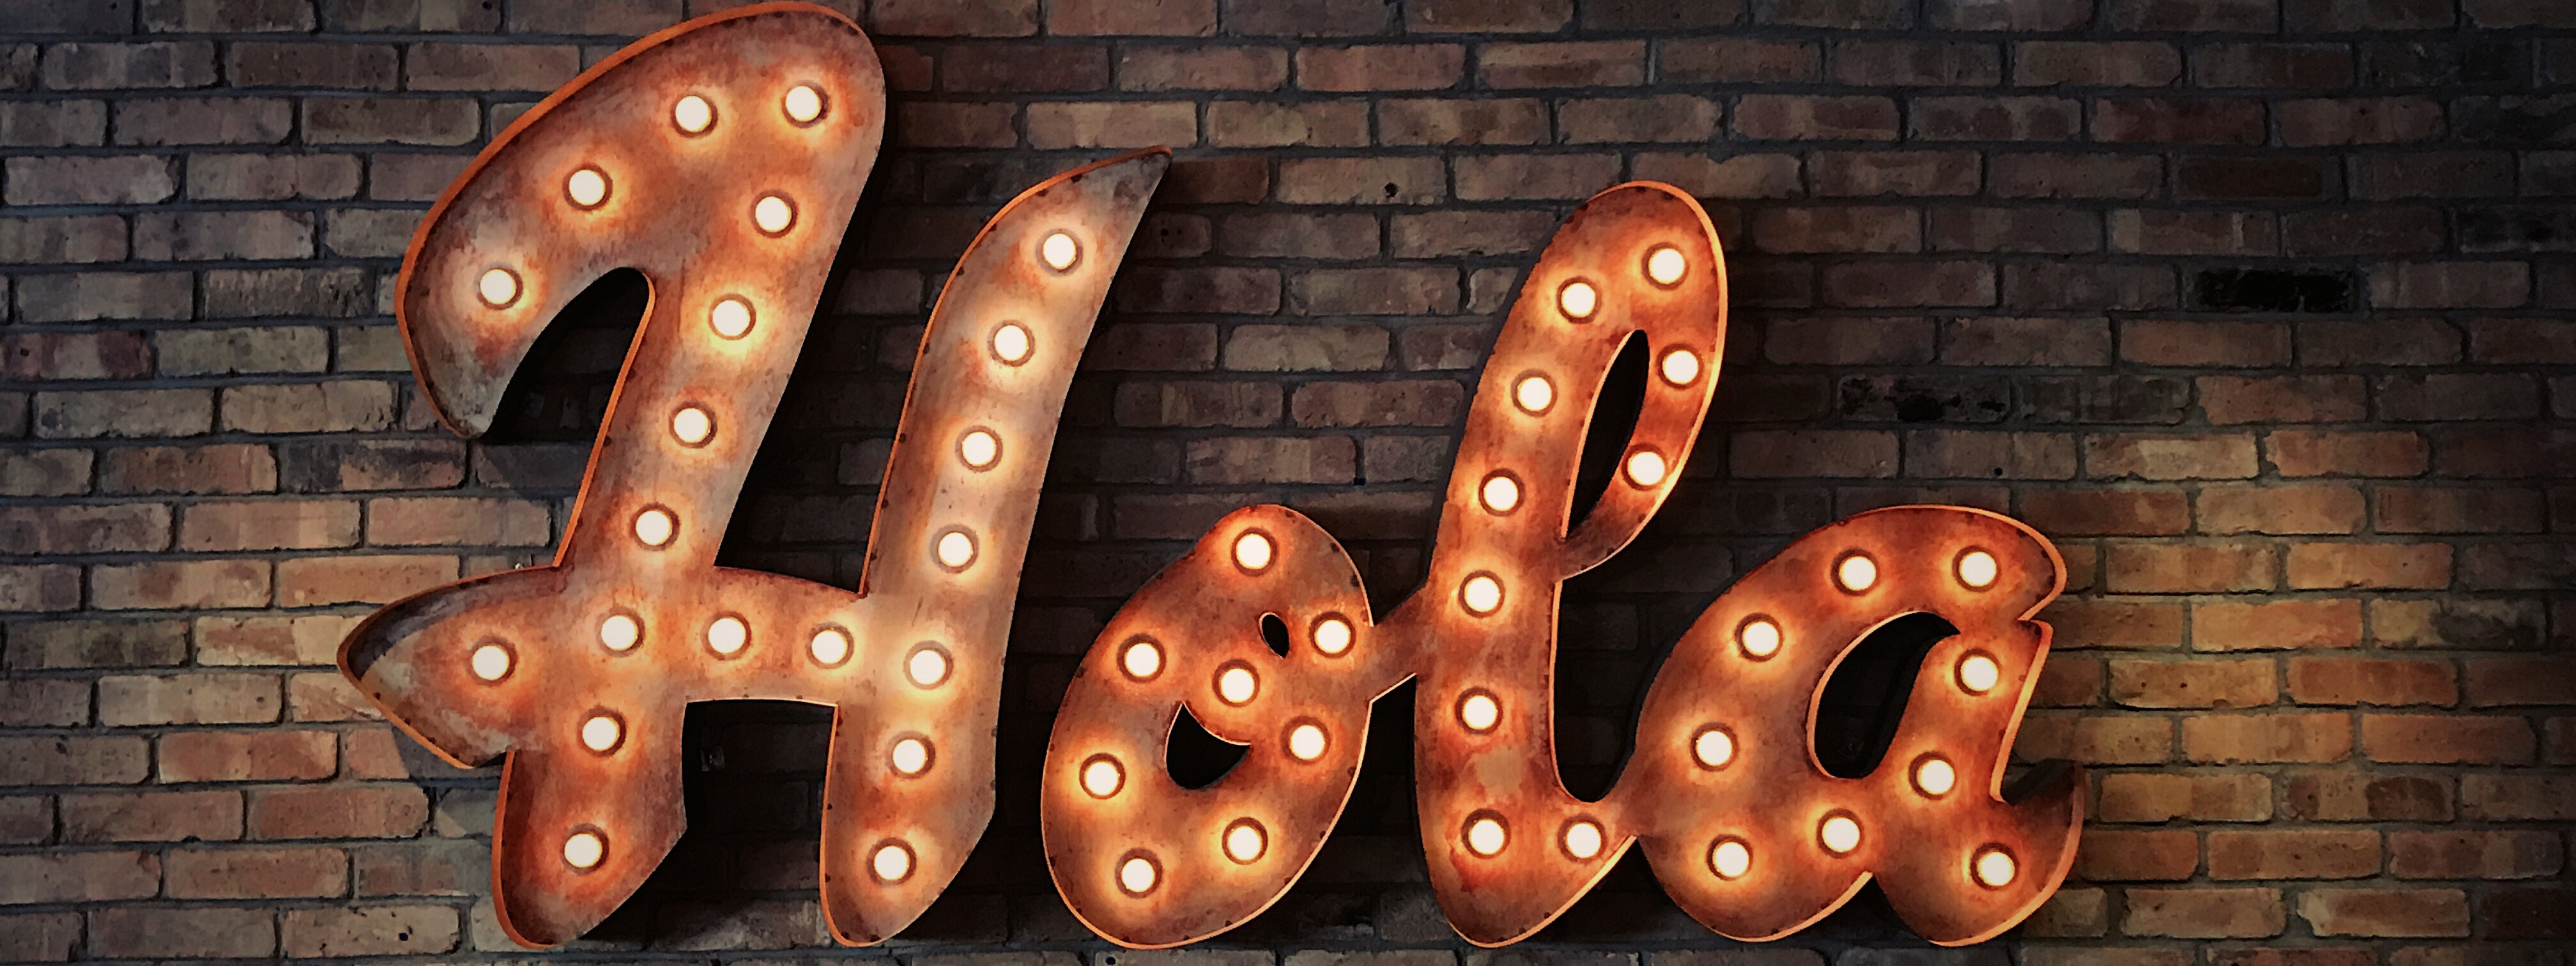 the word 'Hola' in lights on a brick wall